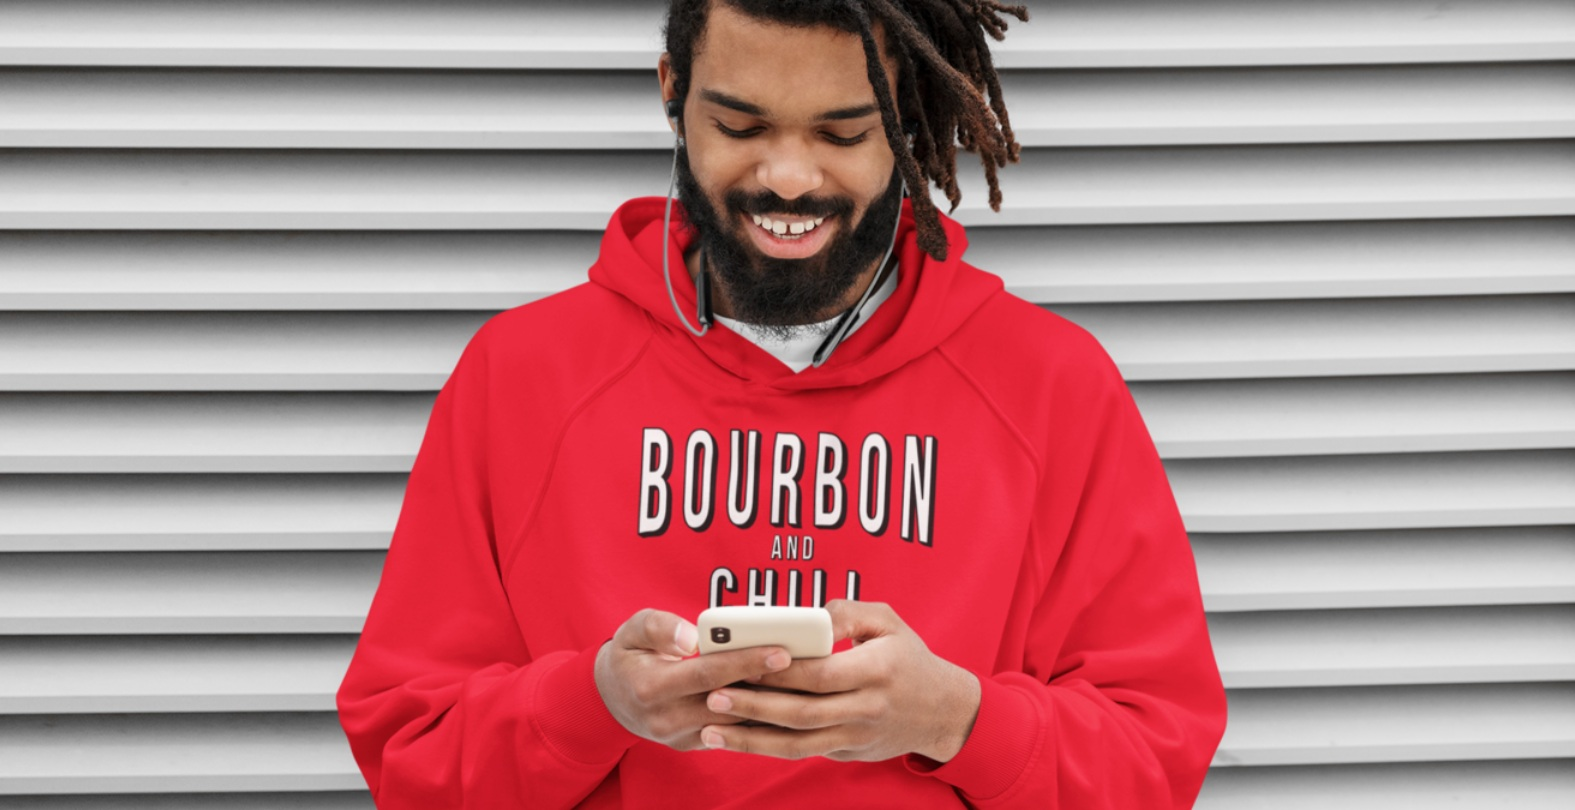 Bourbon and Chill Hoodie - Large/Red on man texting on cell phone leaning against a wall